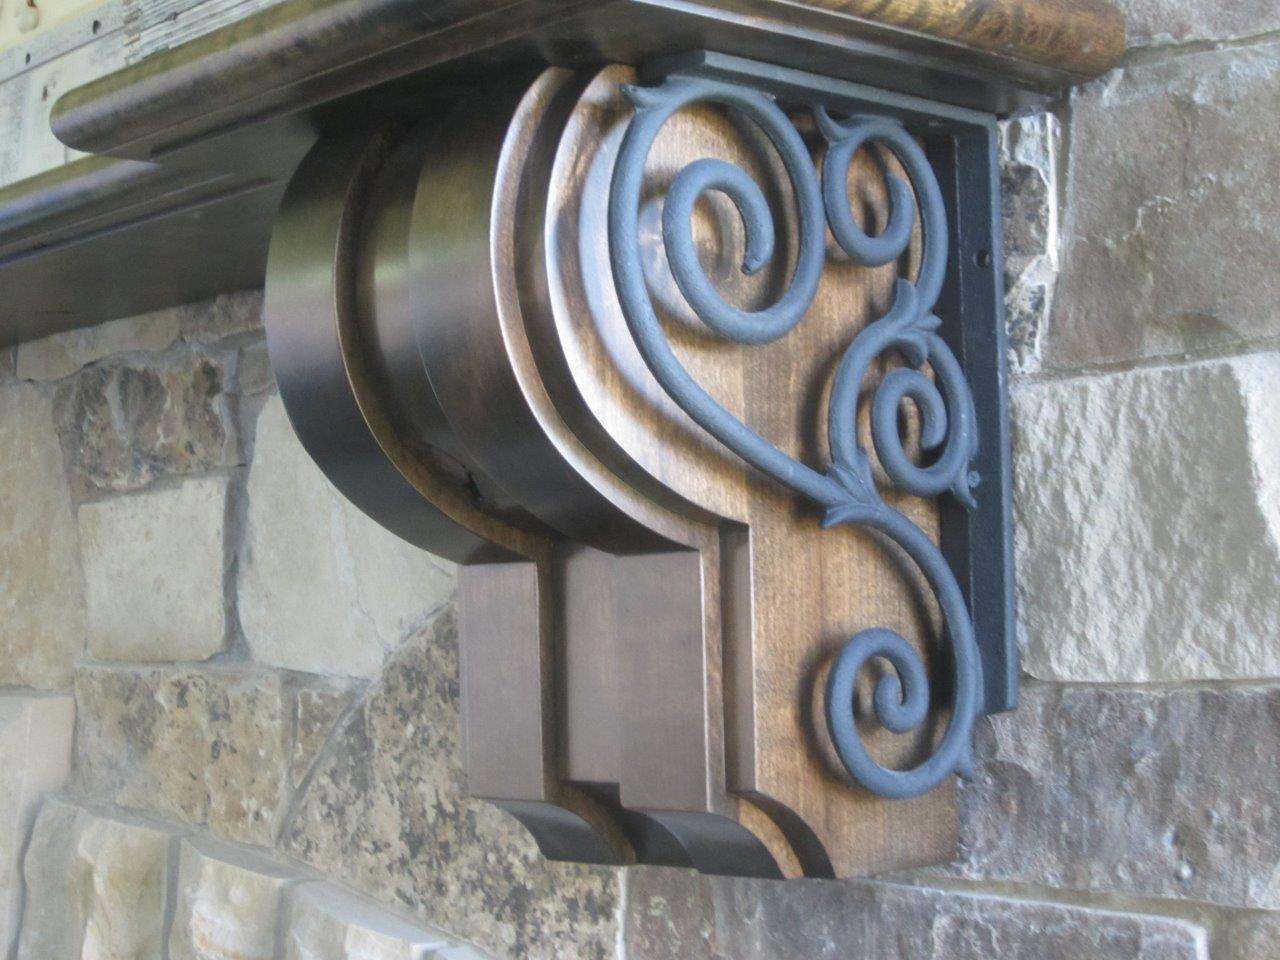 Vail Fireplace Mantel - Classic Wrought Iron Scrolling